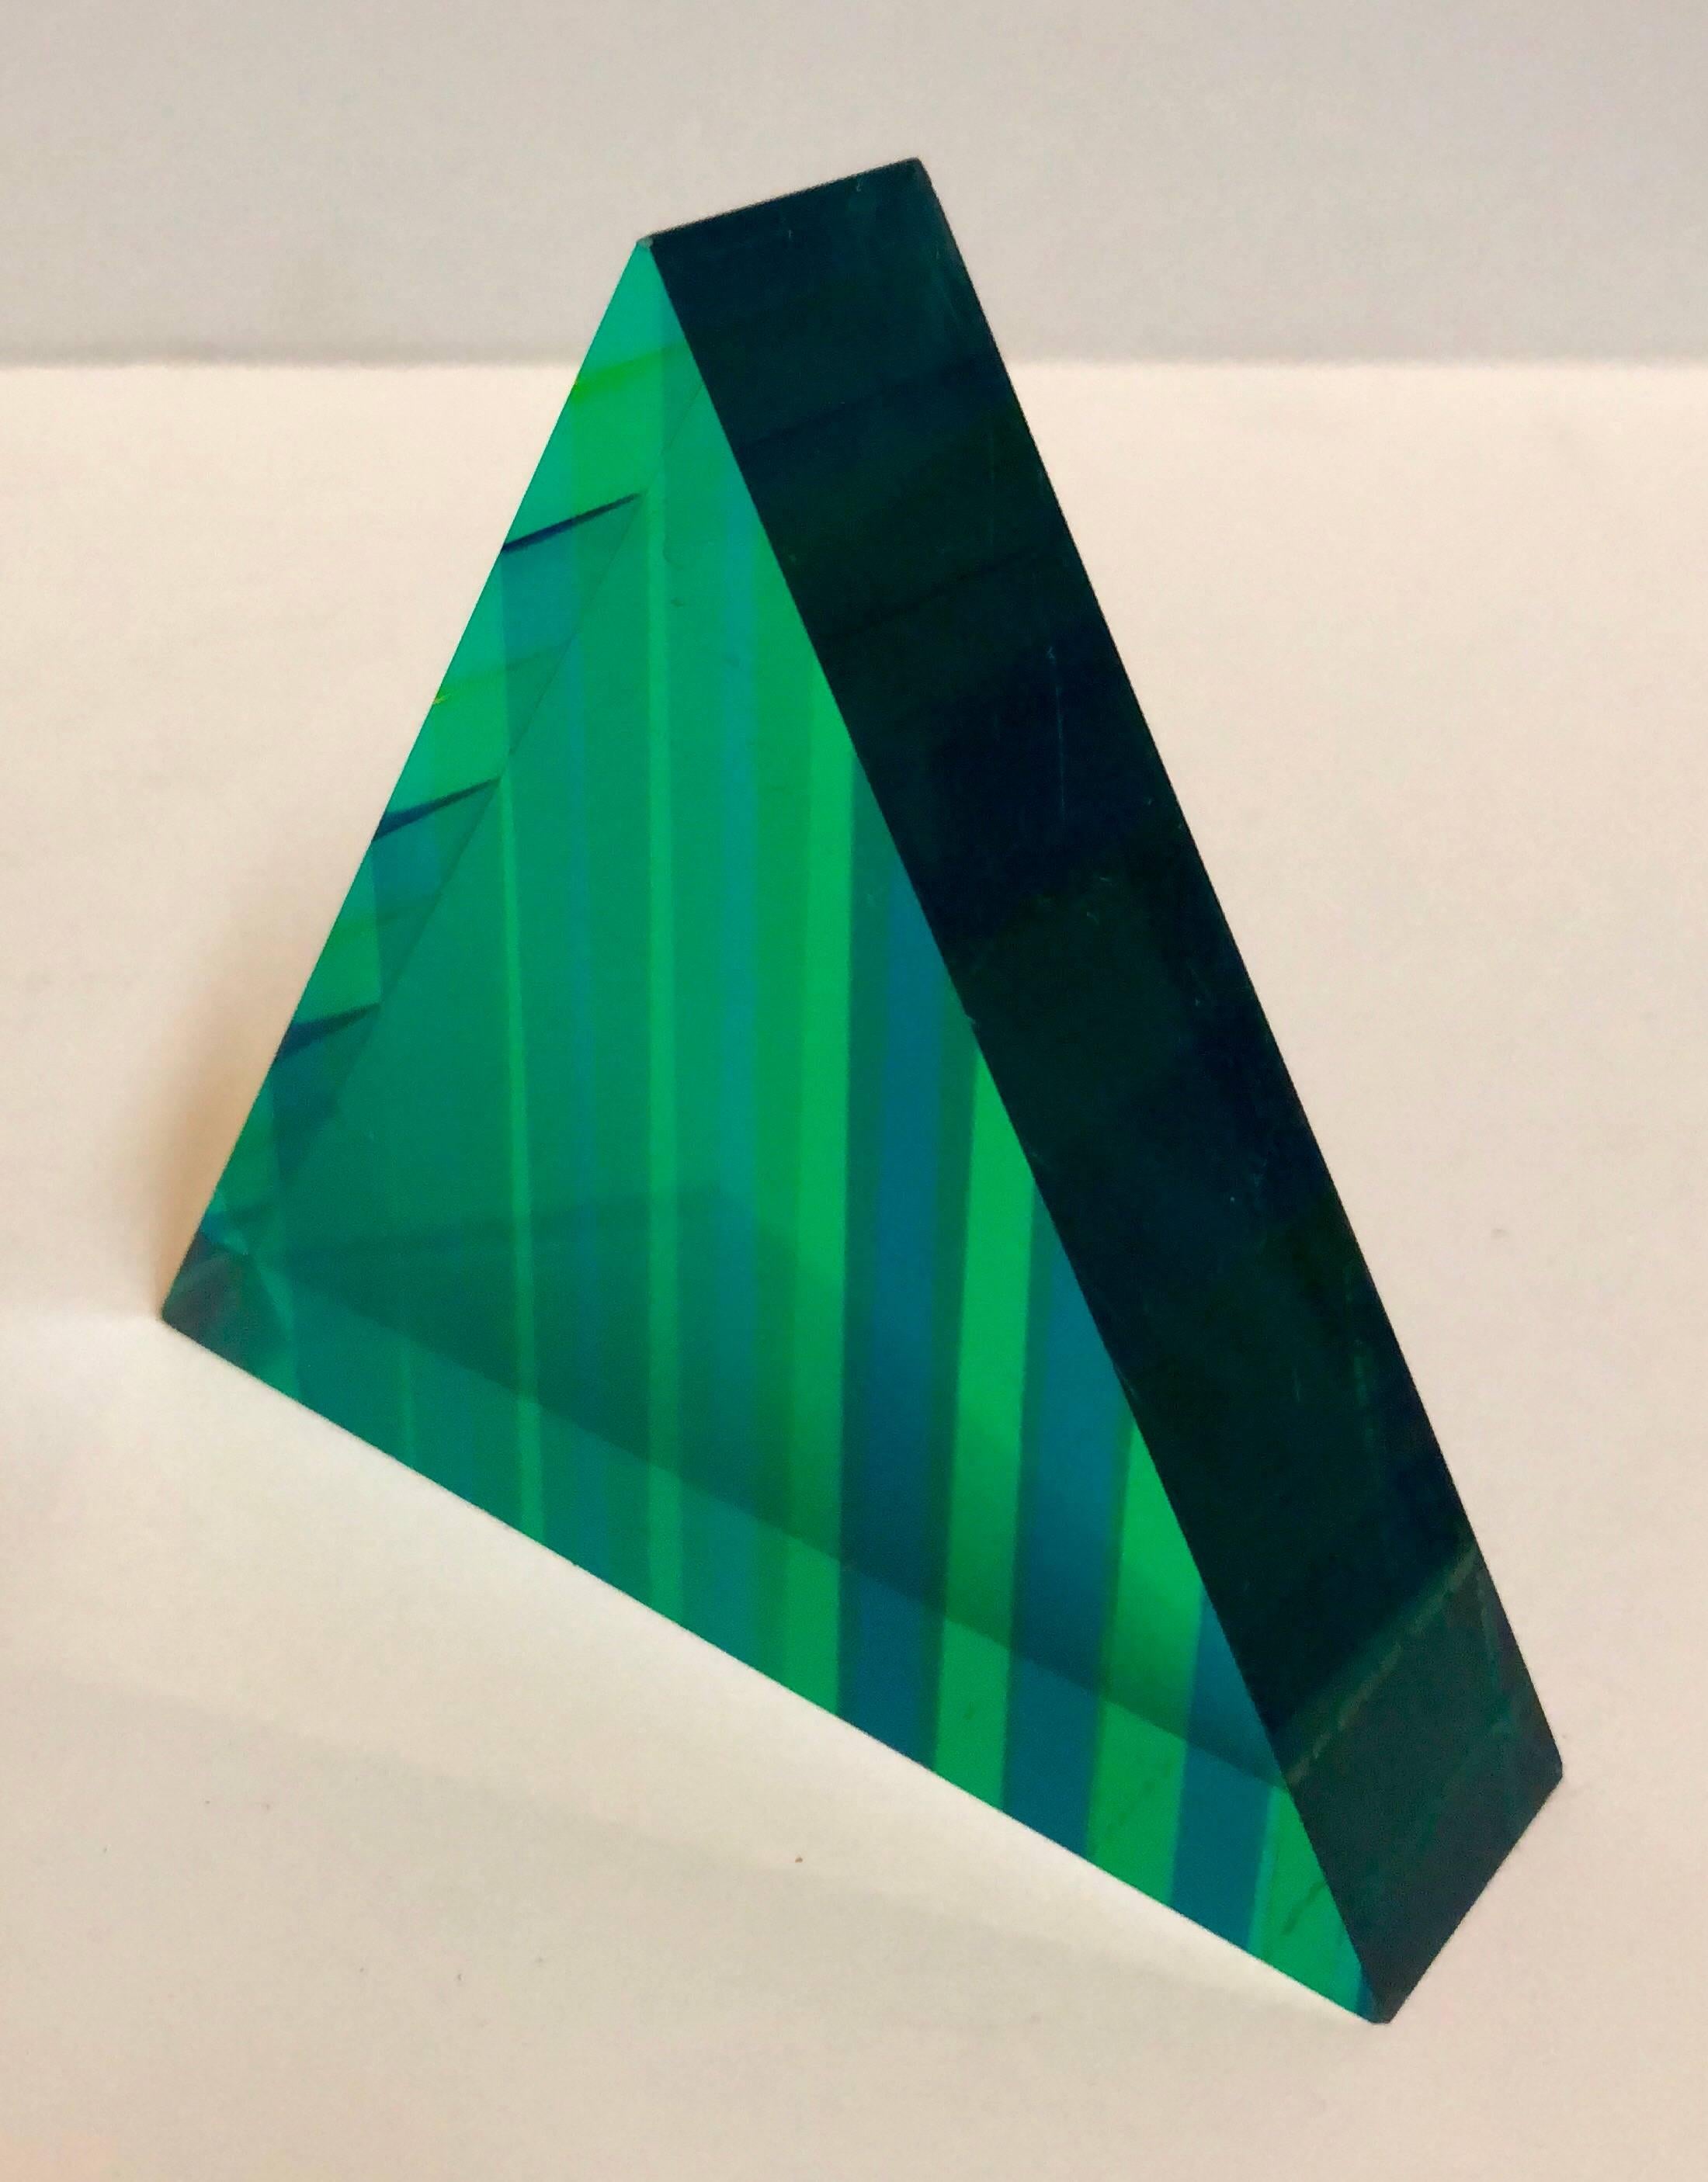 Signed and Dated 1999 Colorful Acrylic Vasa Laminated Lucite Triangle Sculpture 3